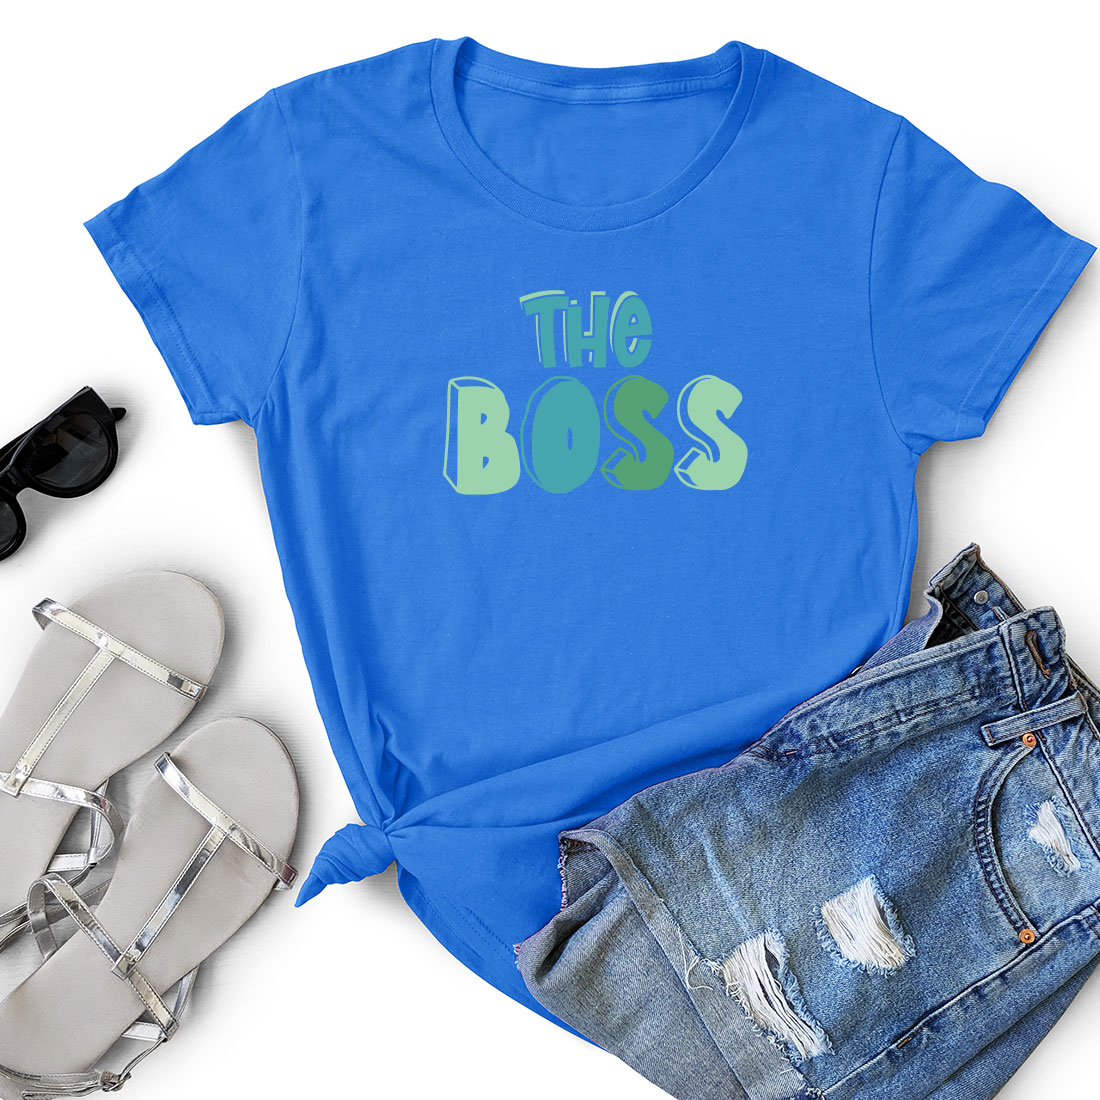 T - shirt that says the boss next to a pair of shorts.